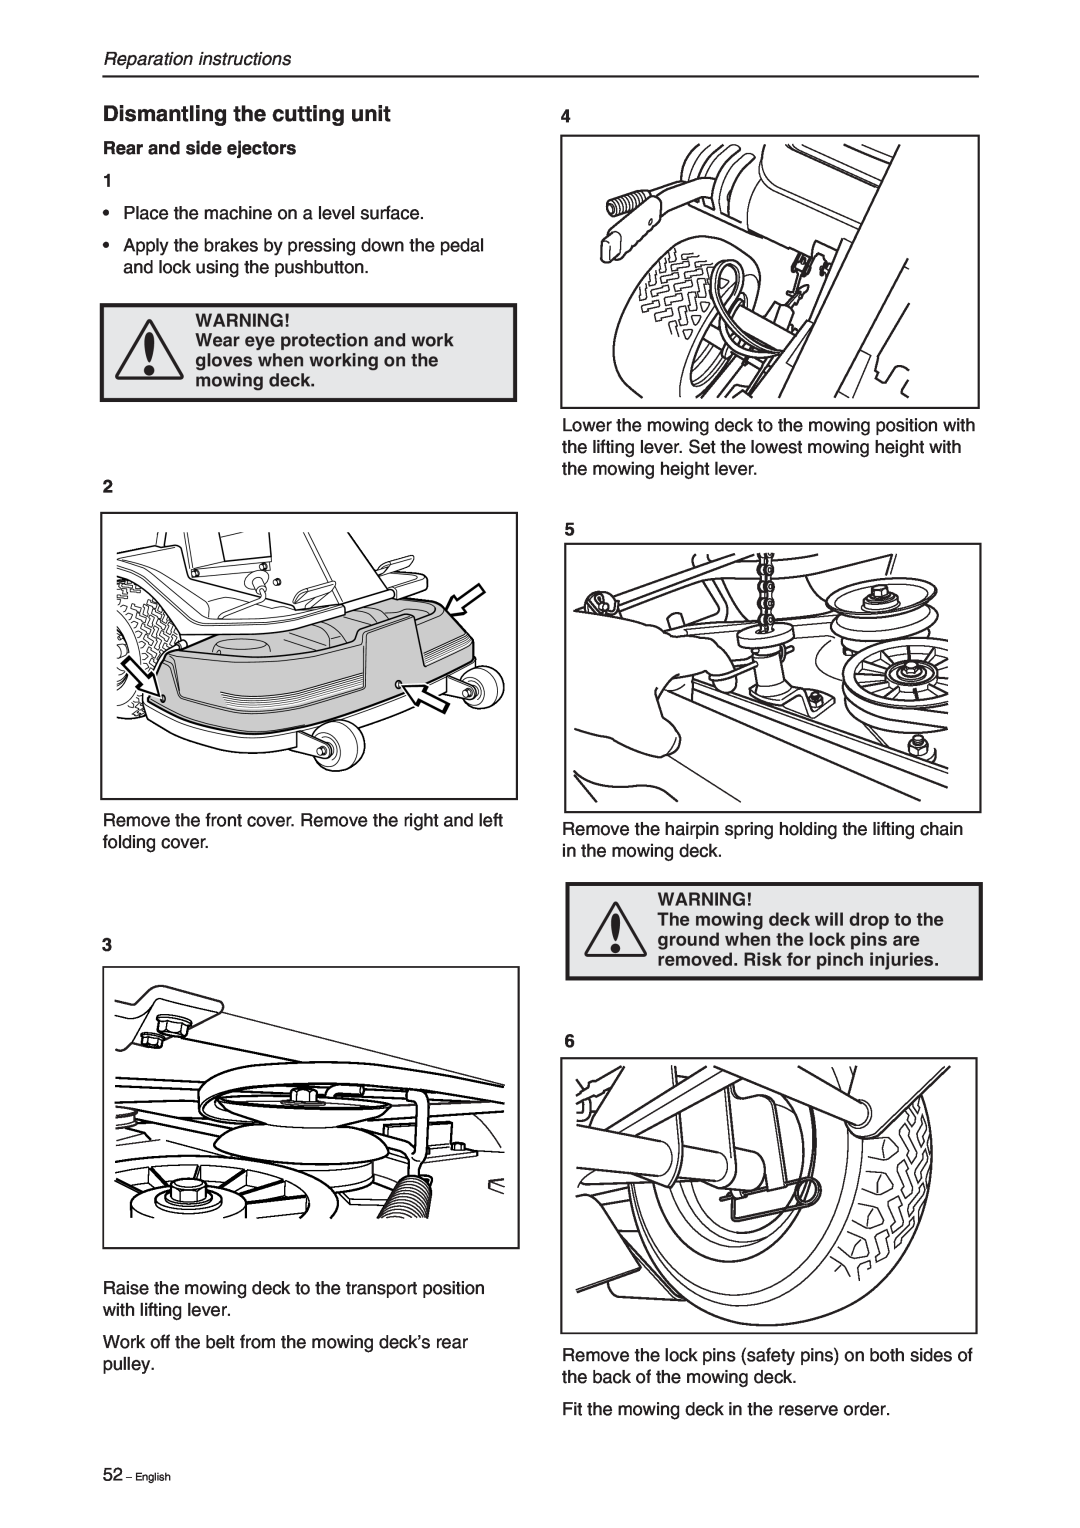 Briggs & Stratton RIDER 13, RIDER 11 manual Dismantling the cutting unit, Rear and side ejectors, Reparation instructions 